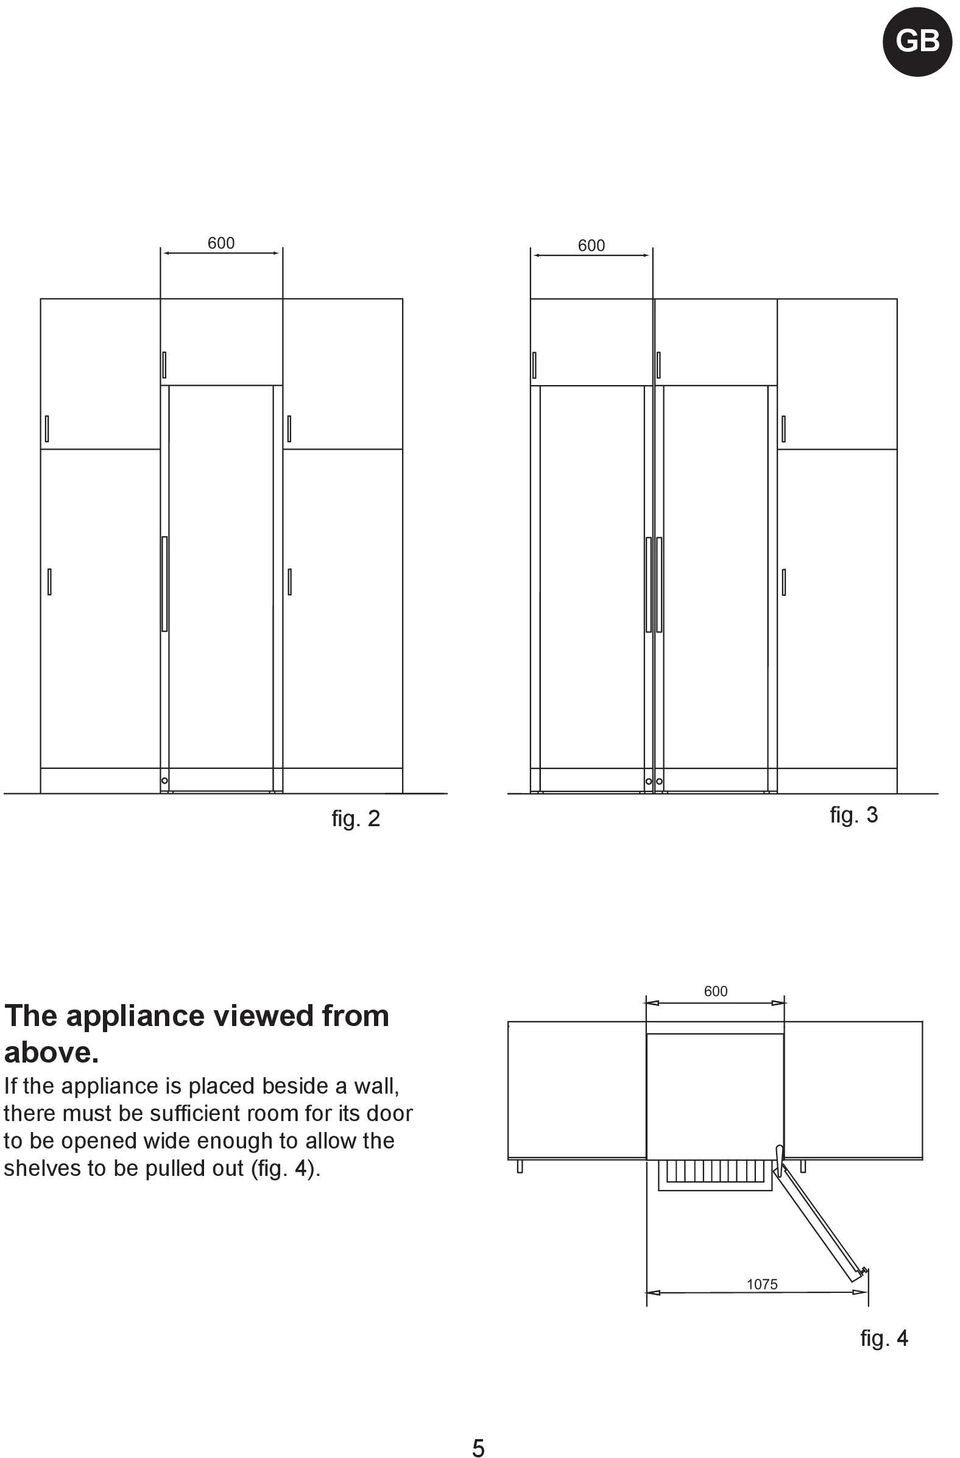 If the appliance is placed beside a wall, there must be